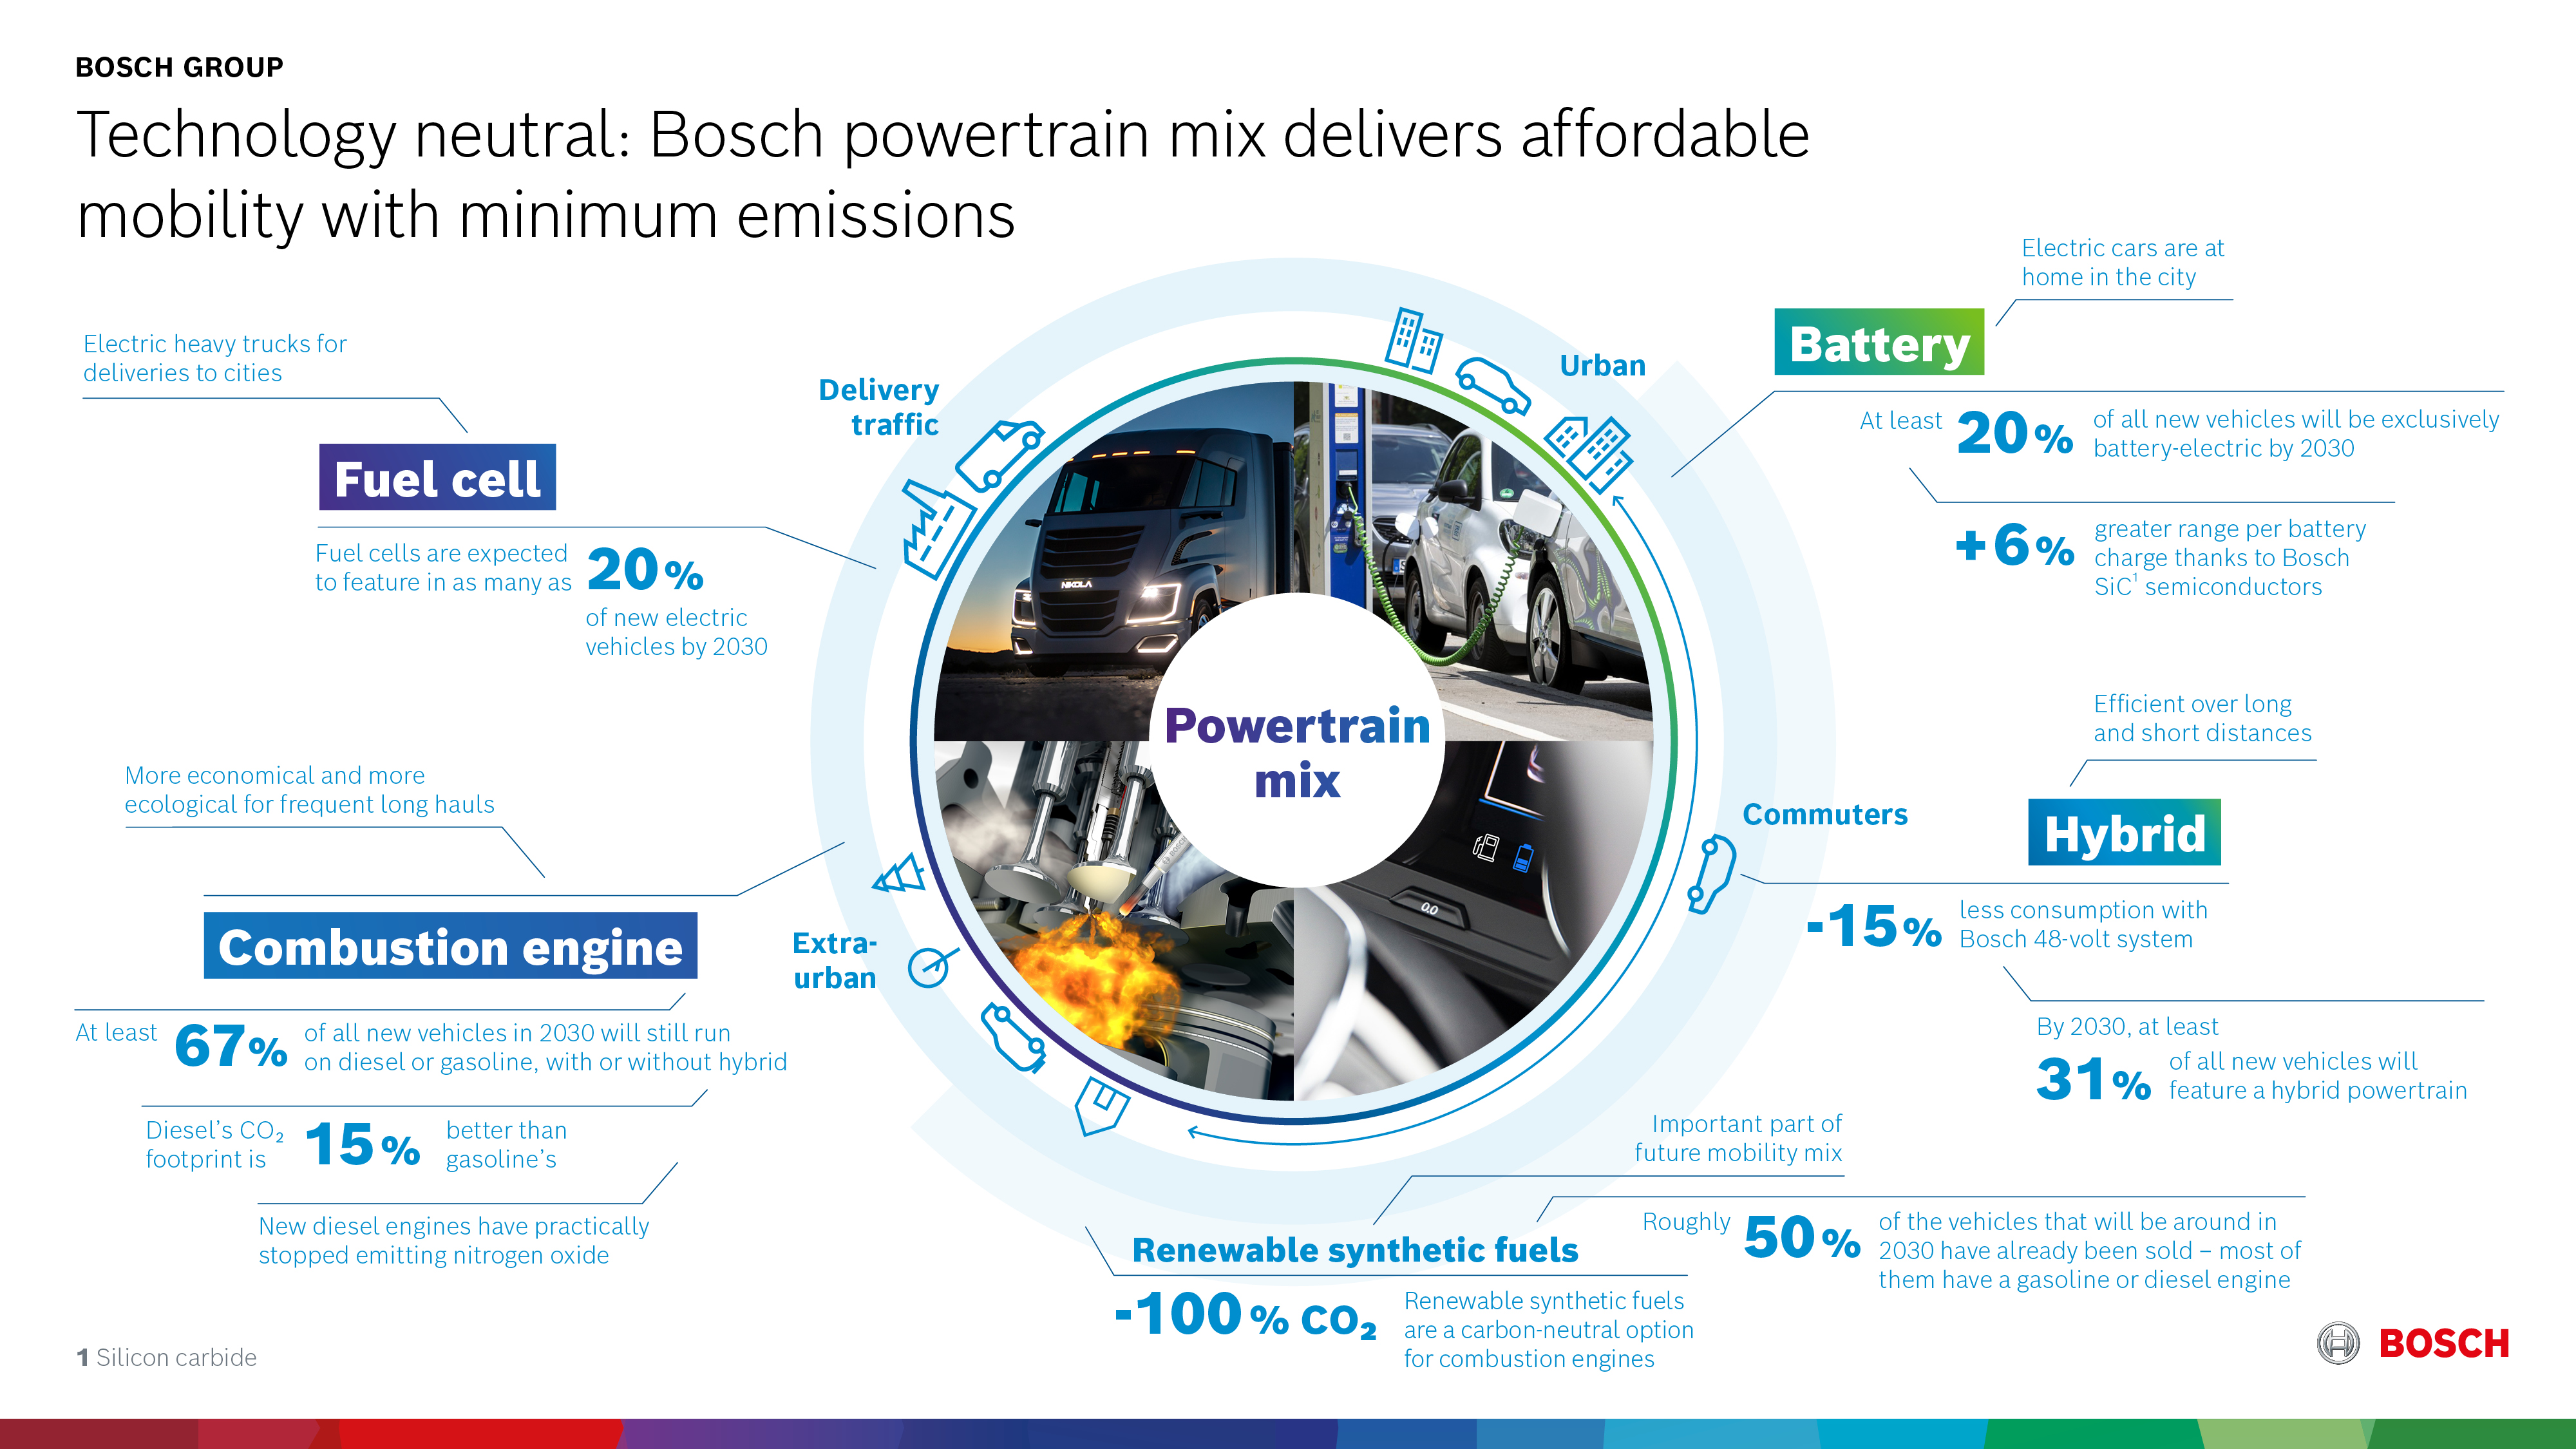 Technology-neutral: affordable mobility that is as emissions-free as possible with Bosch’s powertrain mix